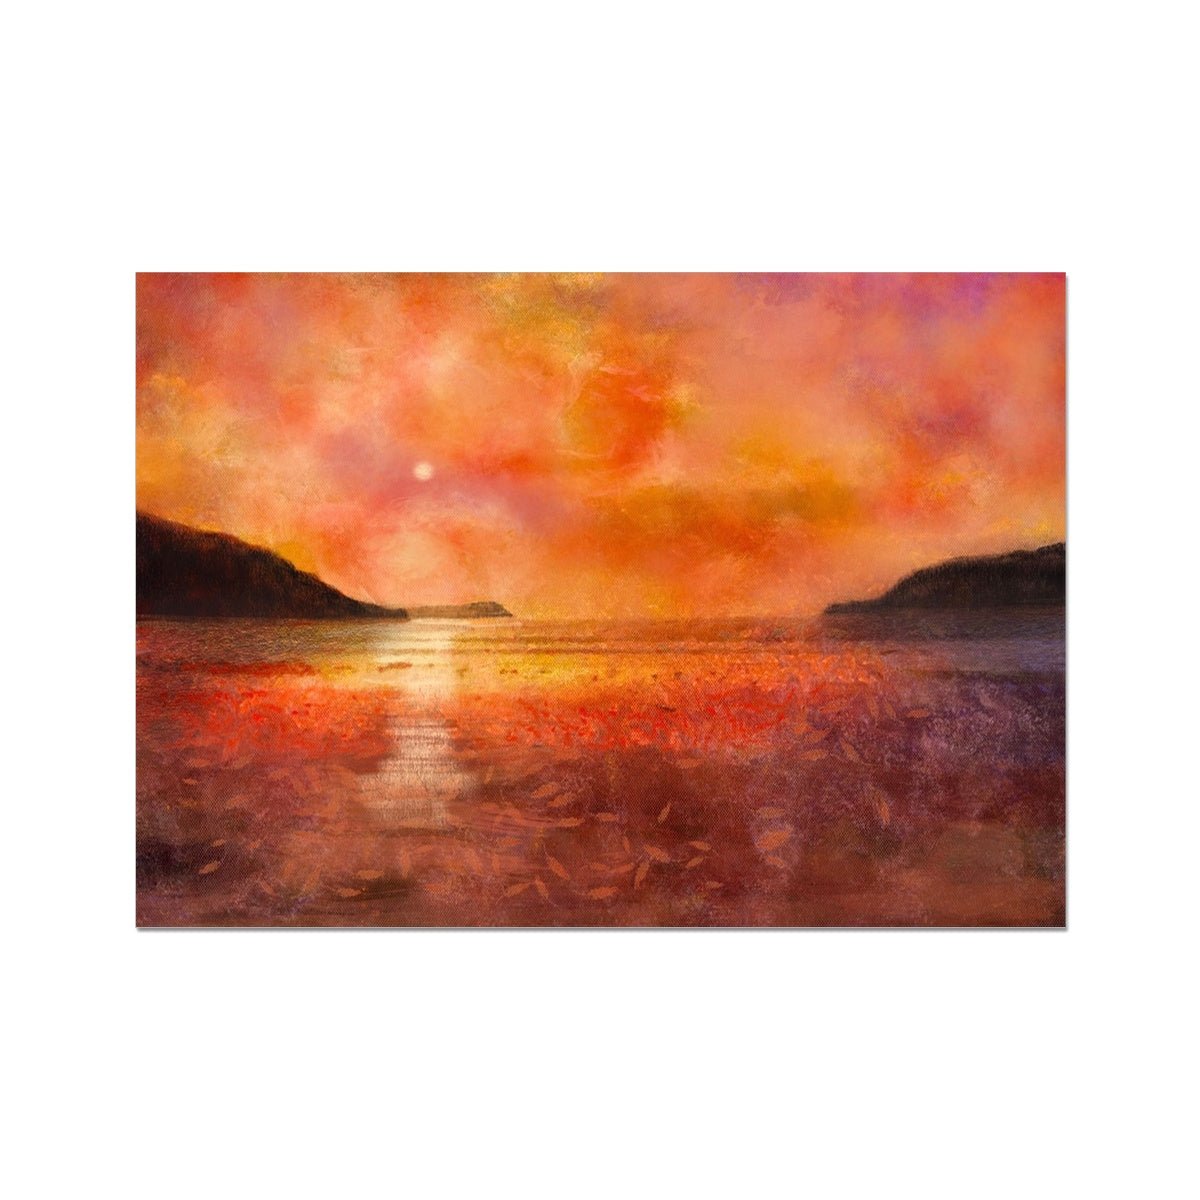 Calgary Beach Sunset Mull Painting | Fine Art Prints From Scotland-Unframed Prints-Hebridean Islands Art Gallery-A2 Landscape-Paintings, Prints, Homeware, Art Gifts From Scotland By Scottish Artist Kevin Hunter